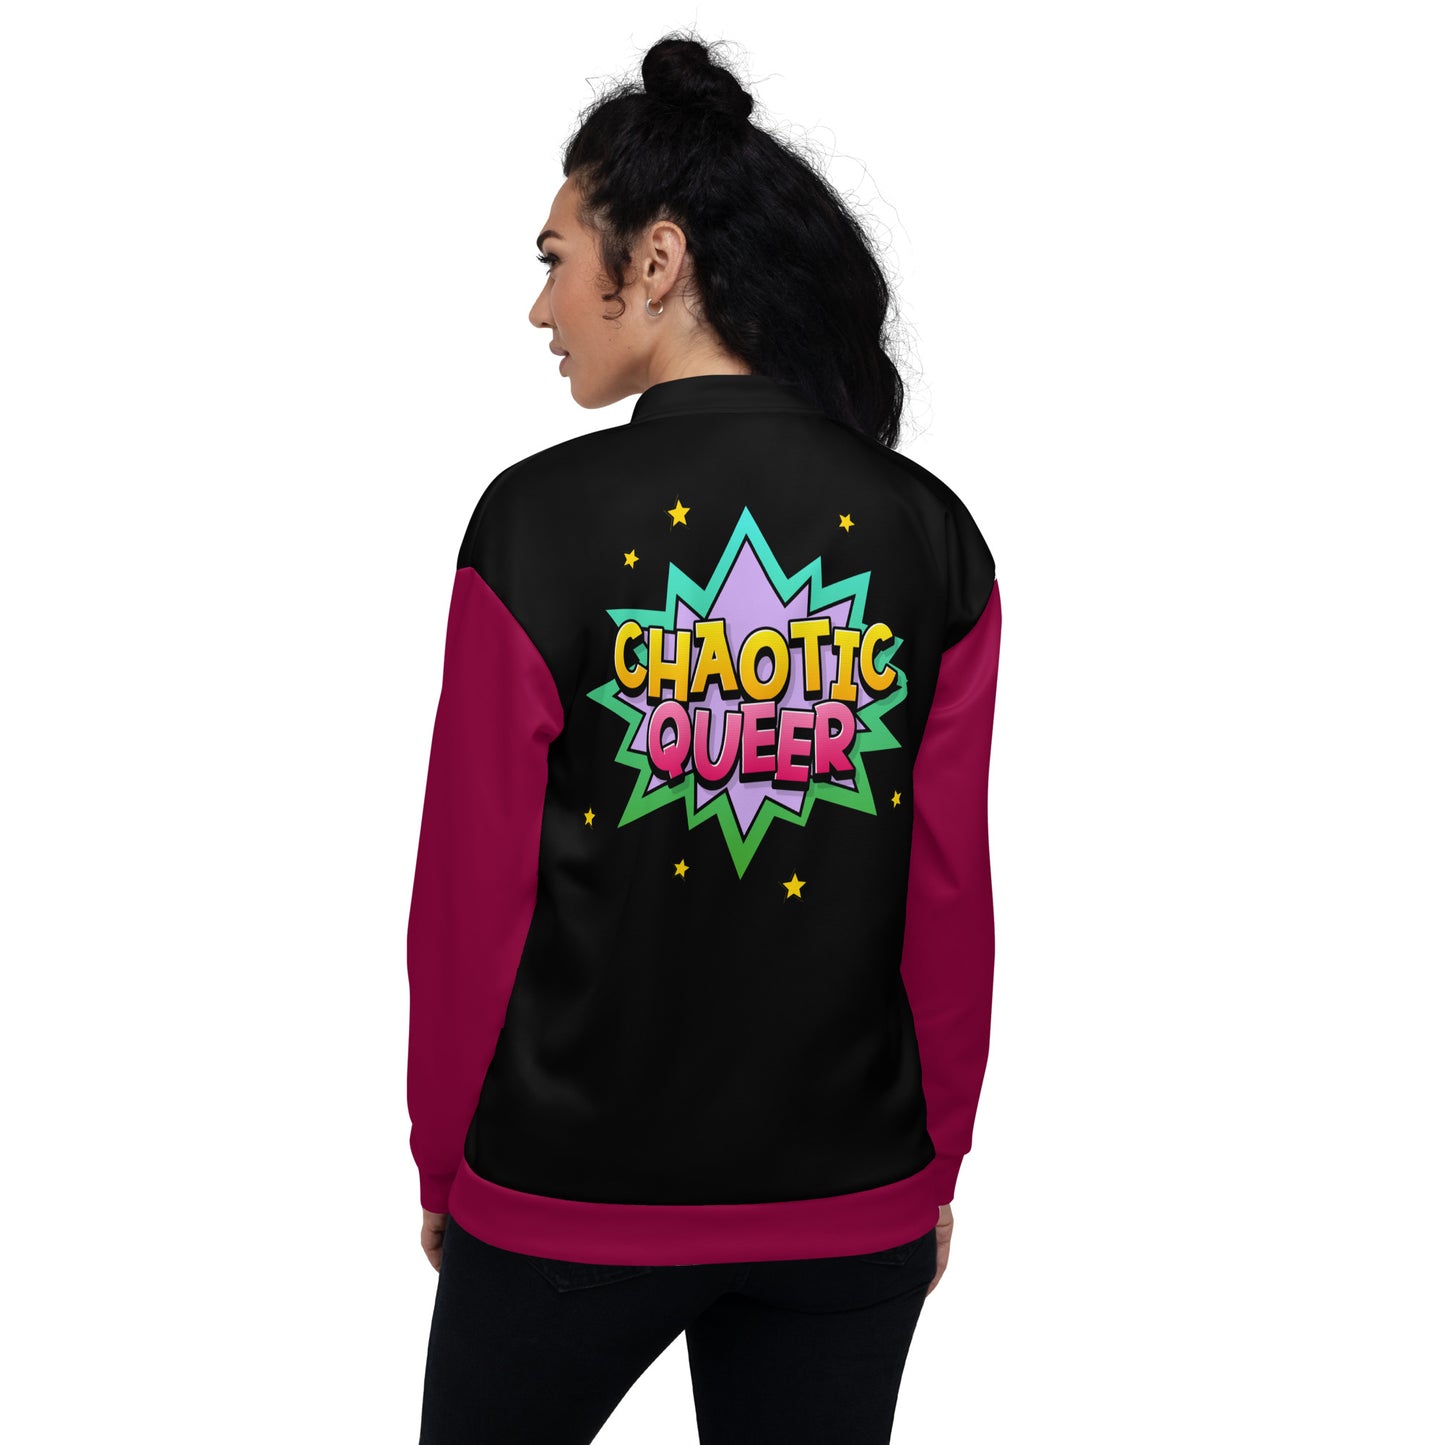 Chaotic Queer Jacket